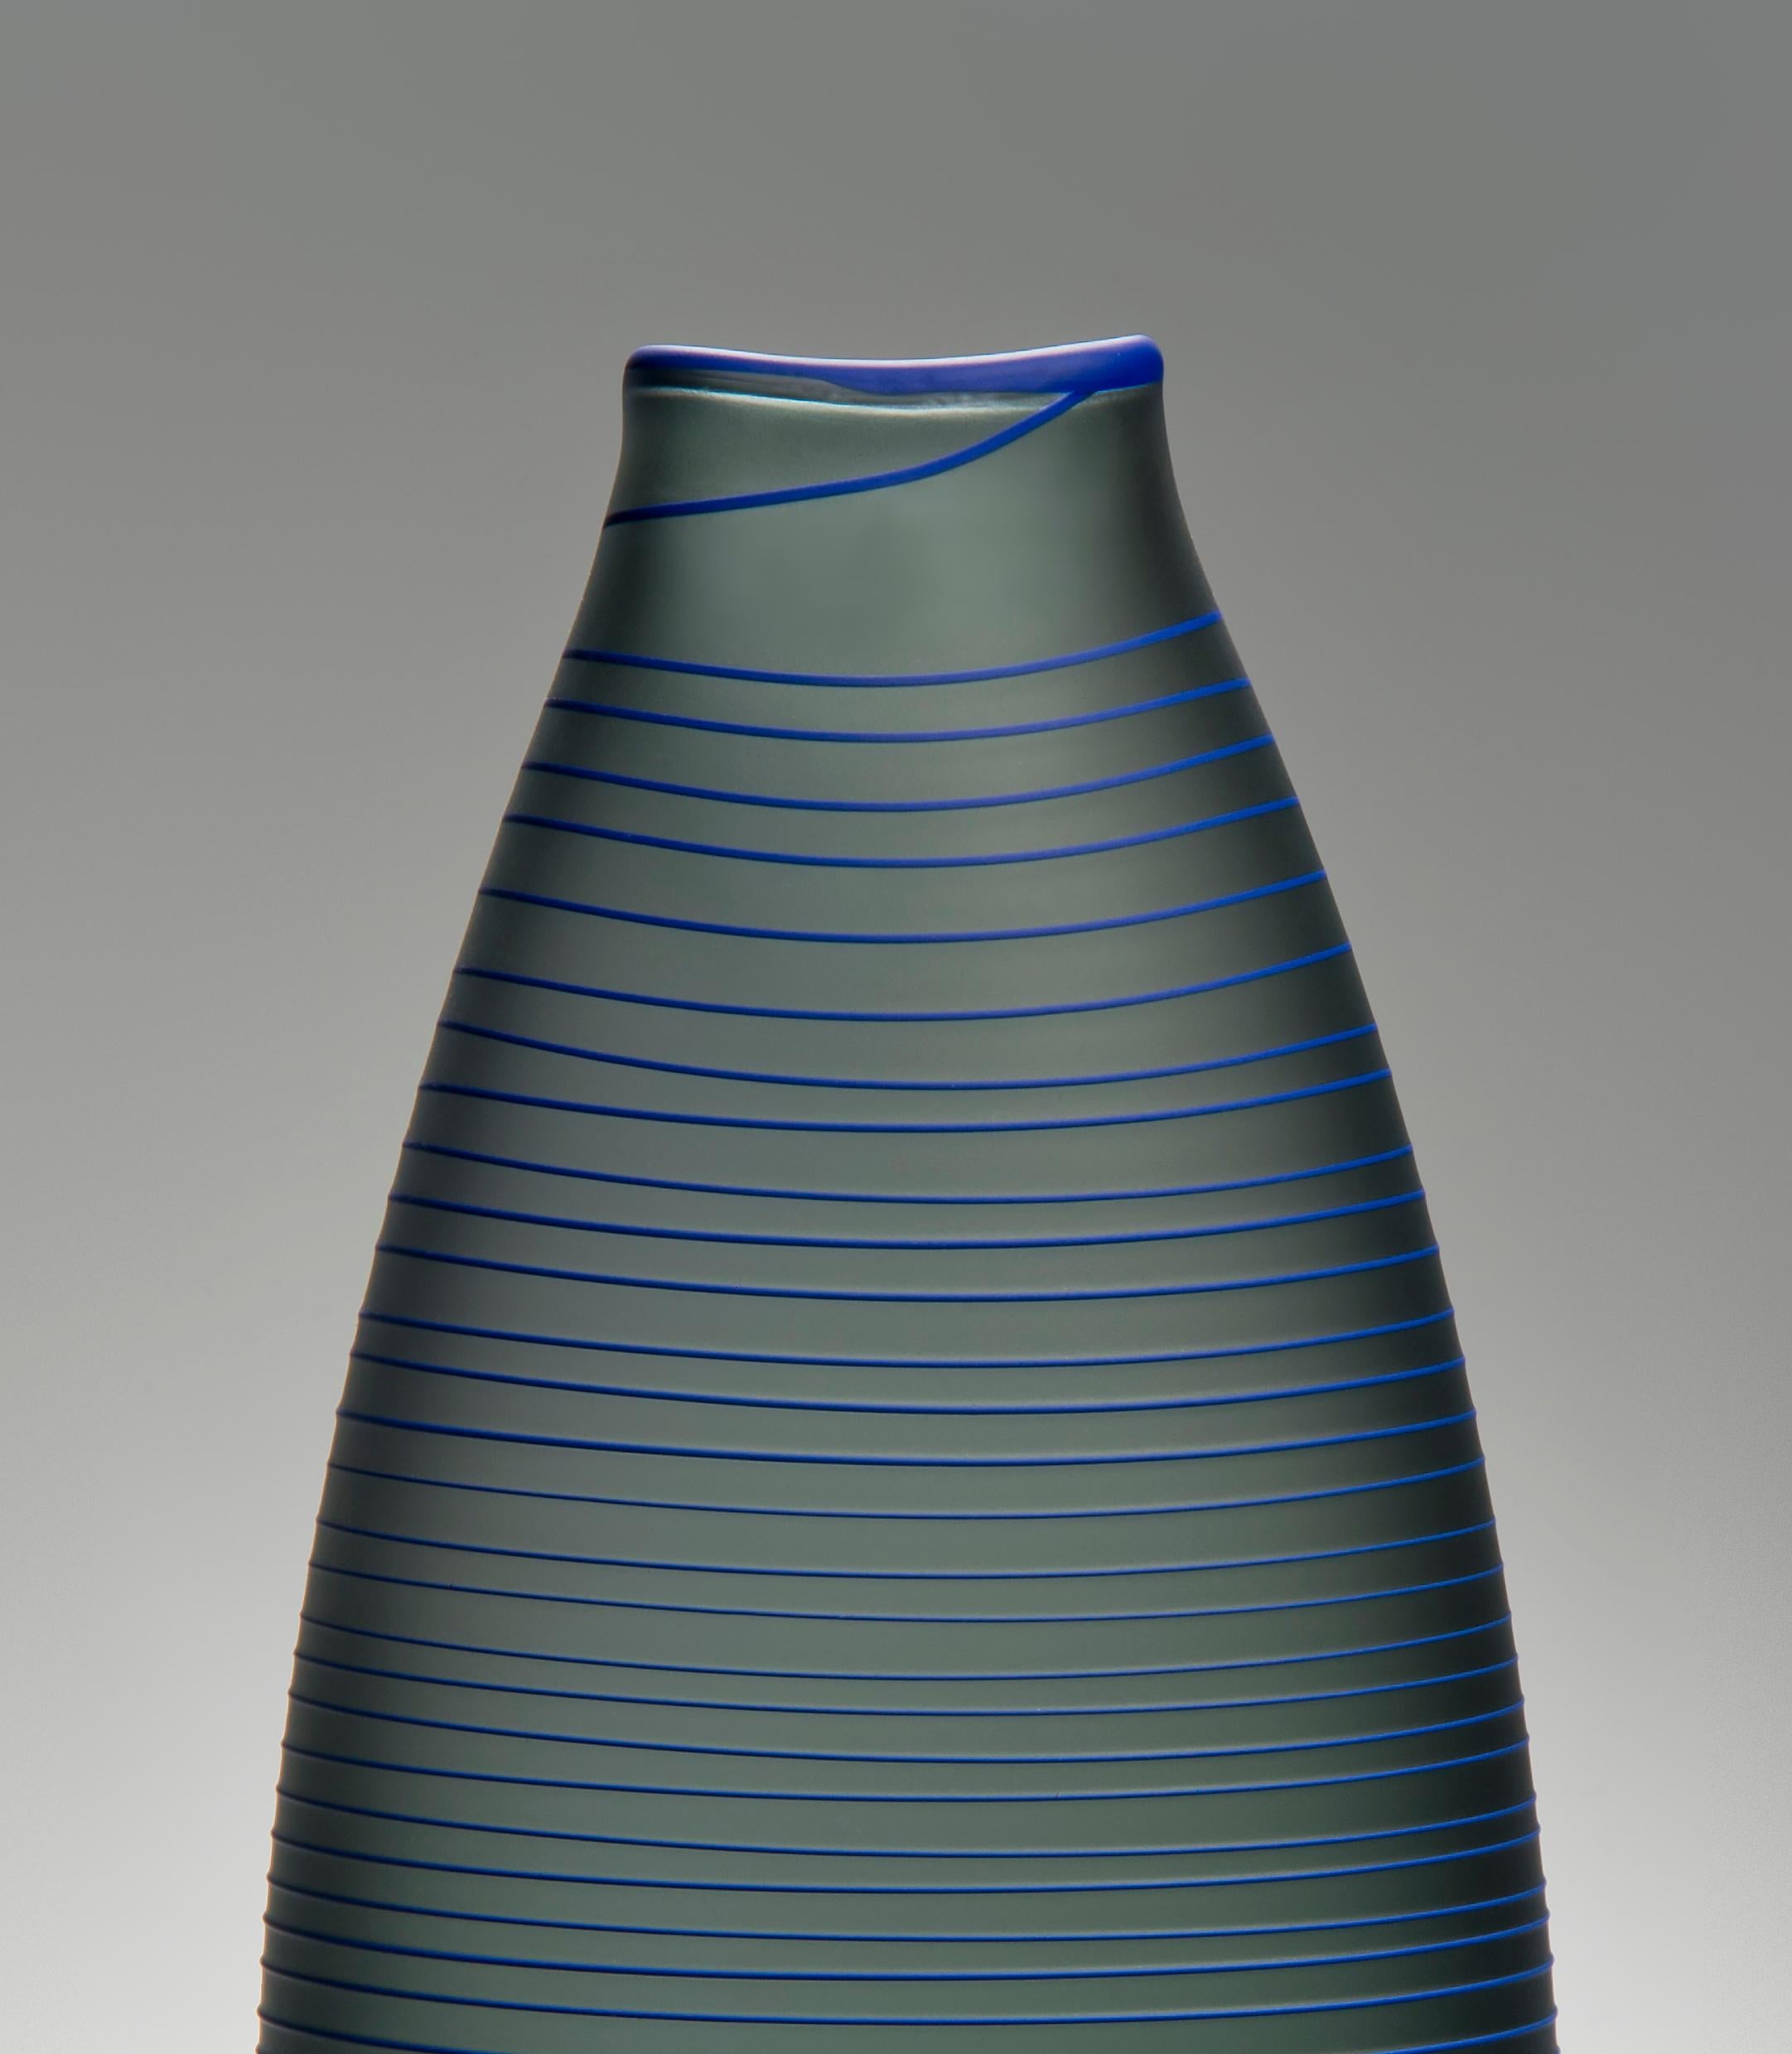 British Tonal Frequency Vase in Grey, a unique glass vase in grey & blue by Liam Reeves